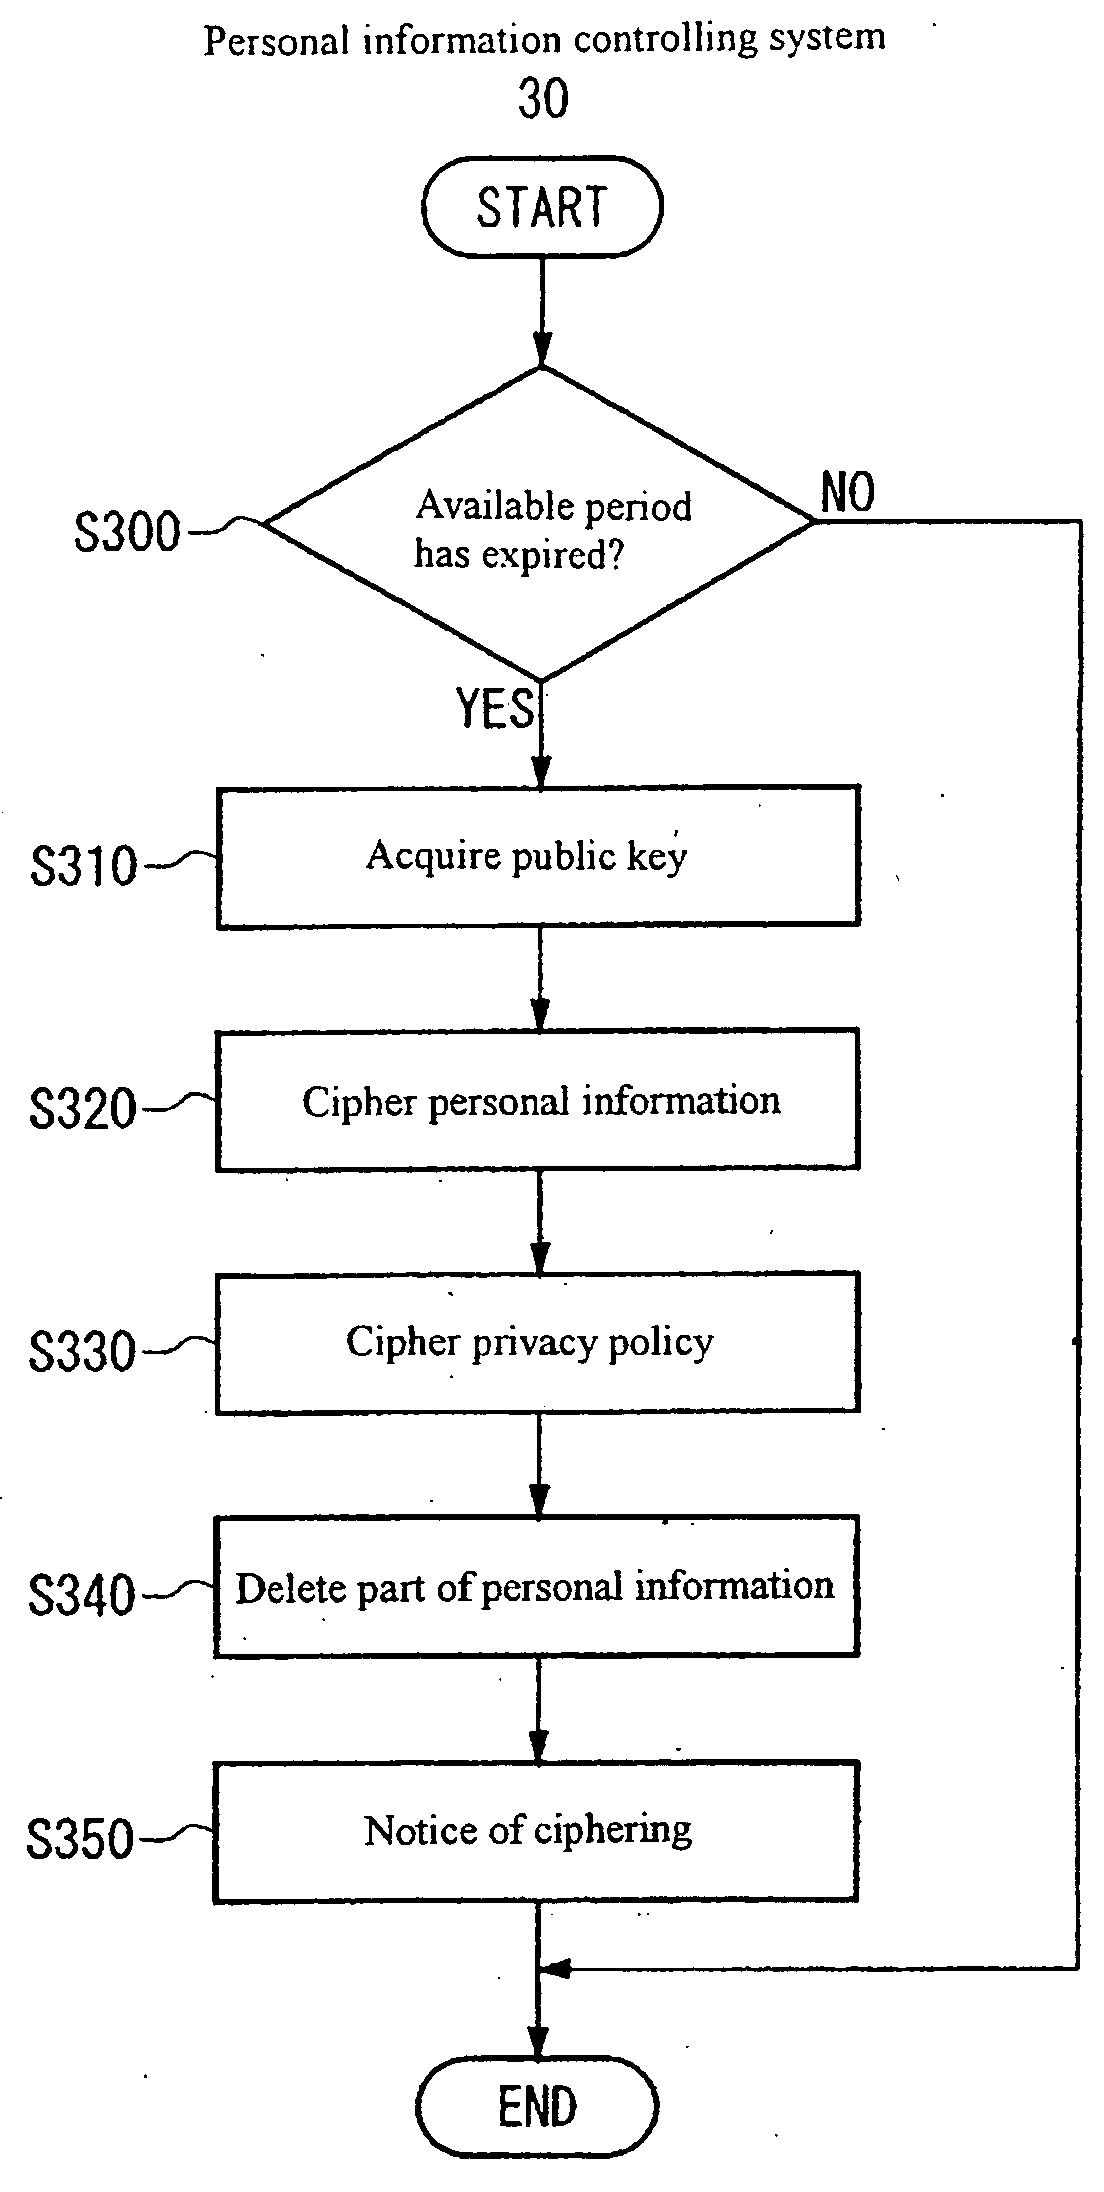 Personal information control and processing